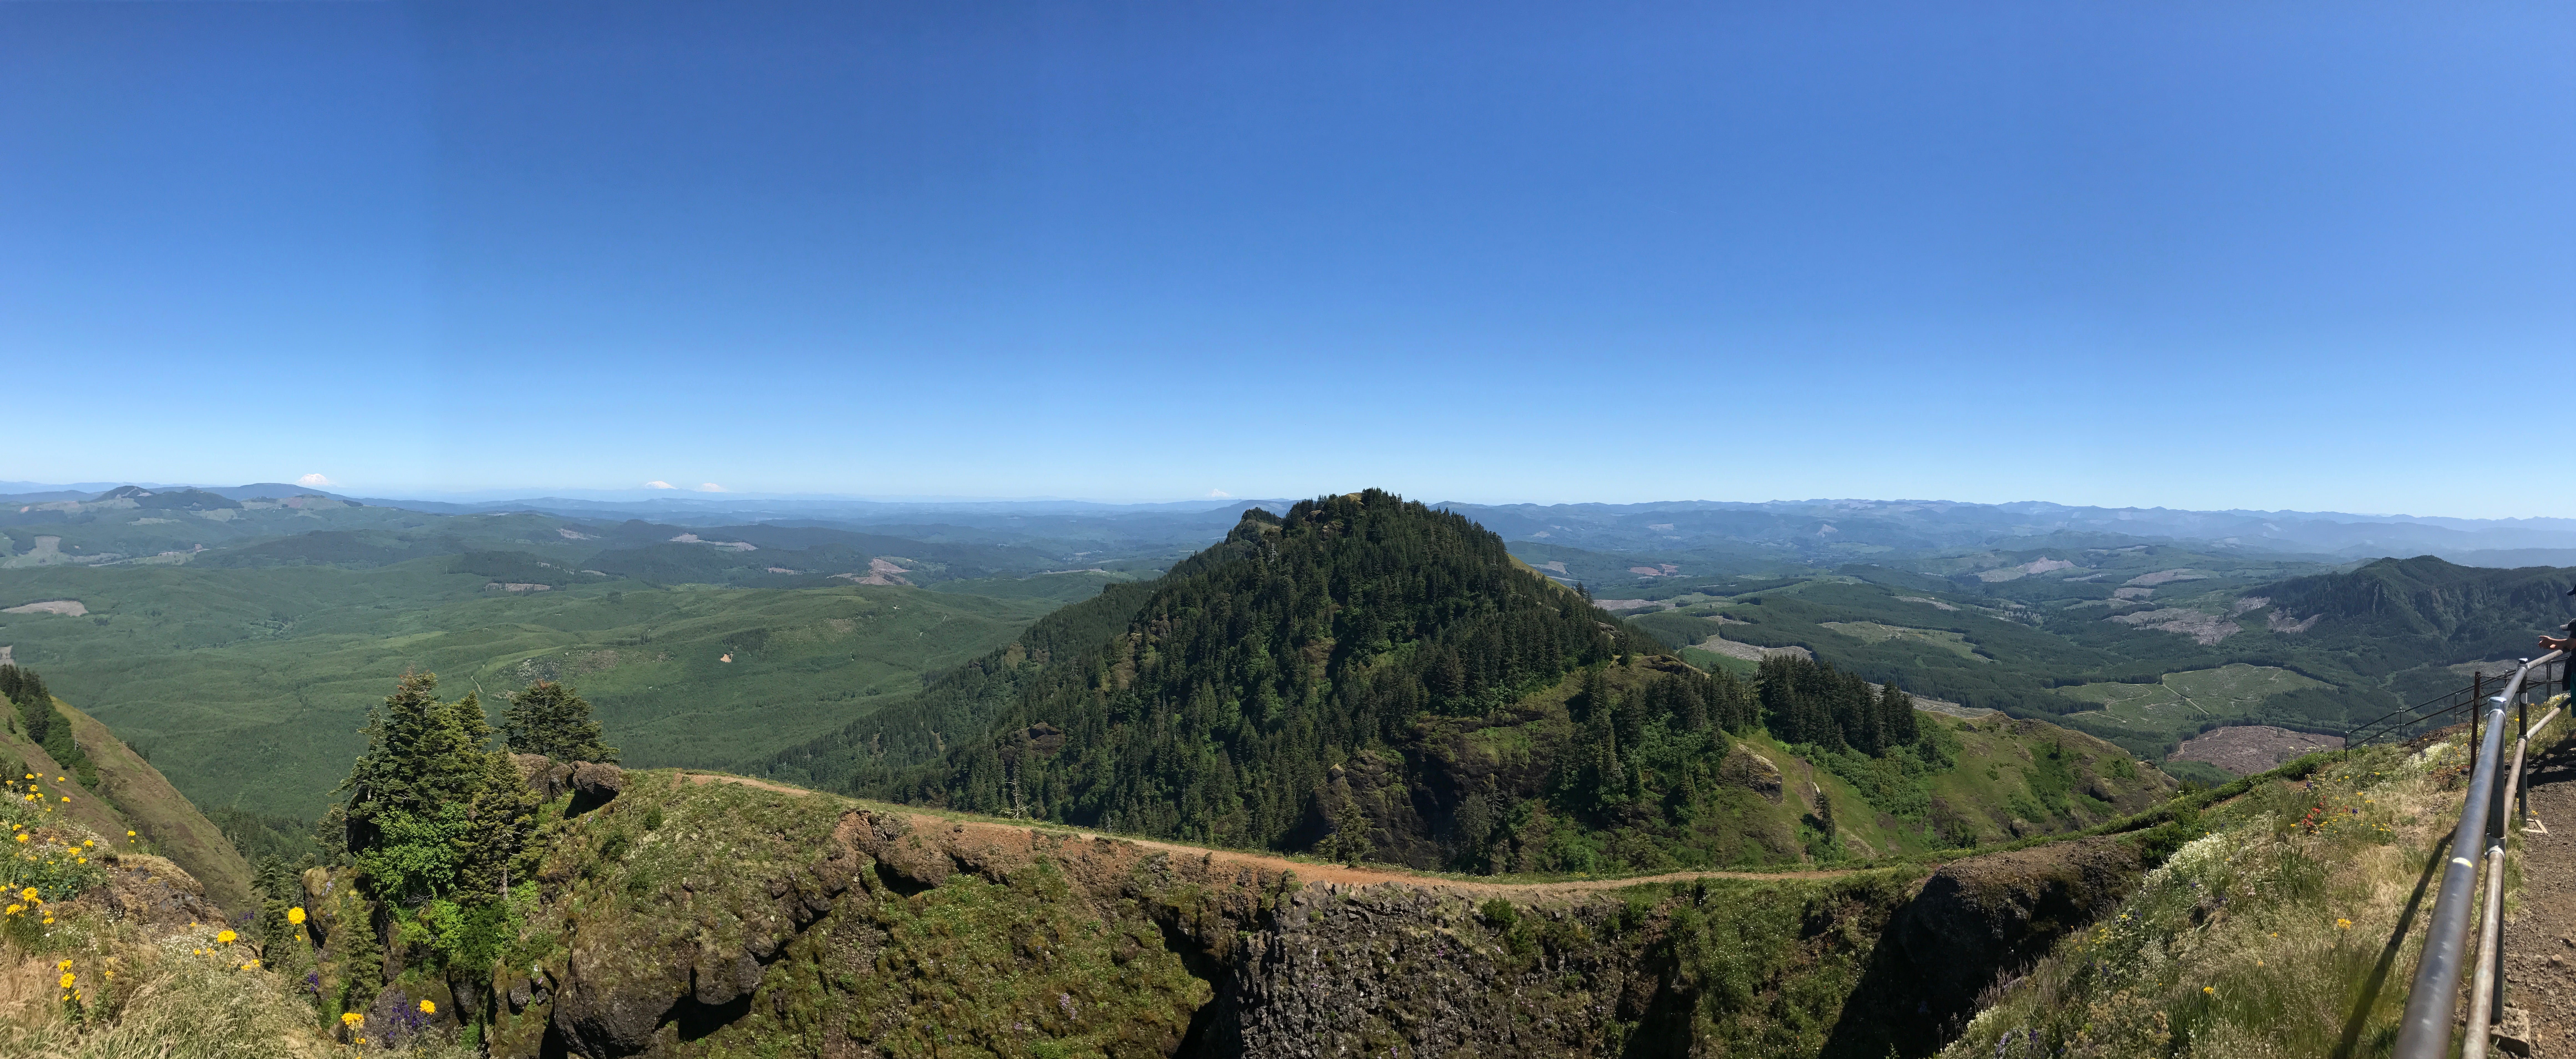 The view from Saddle Mountain Summit looking East.